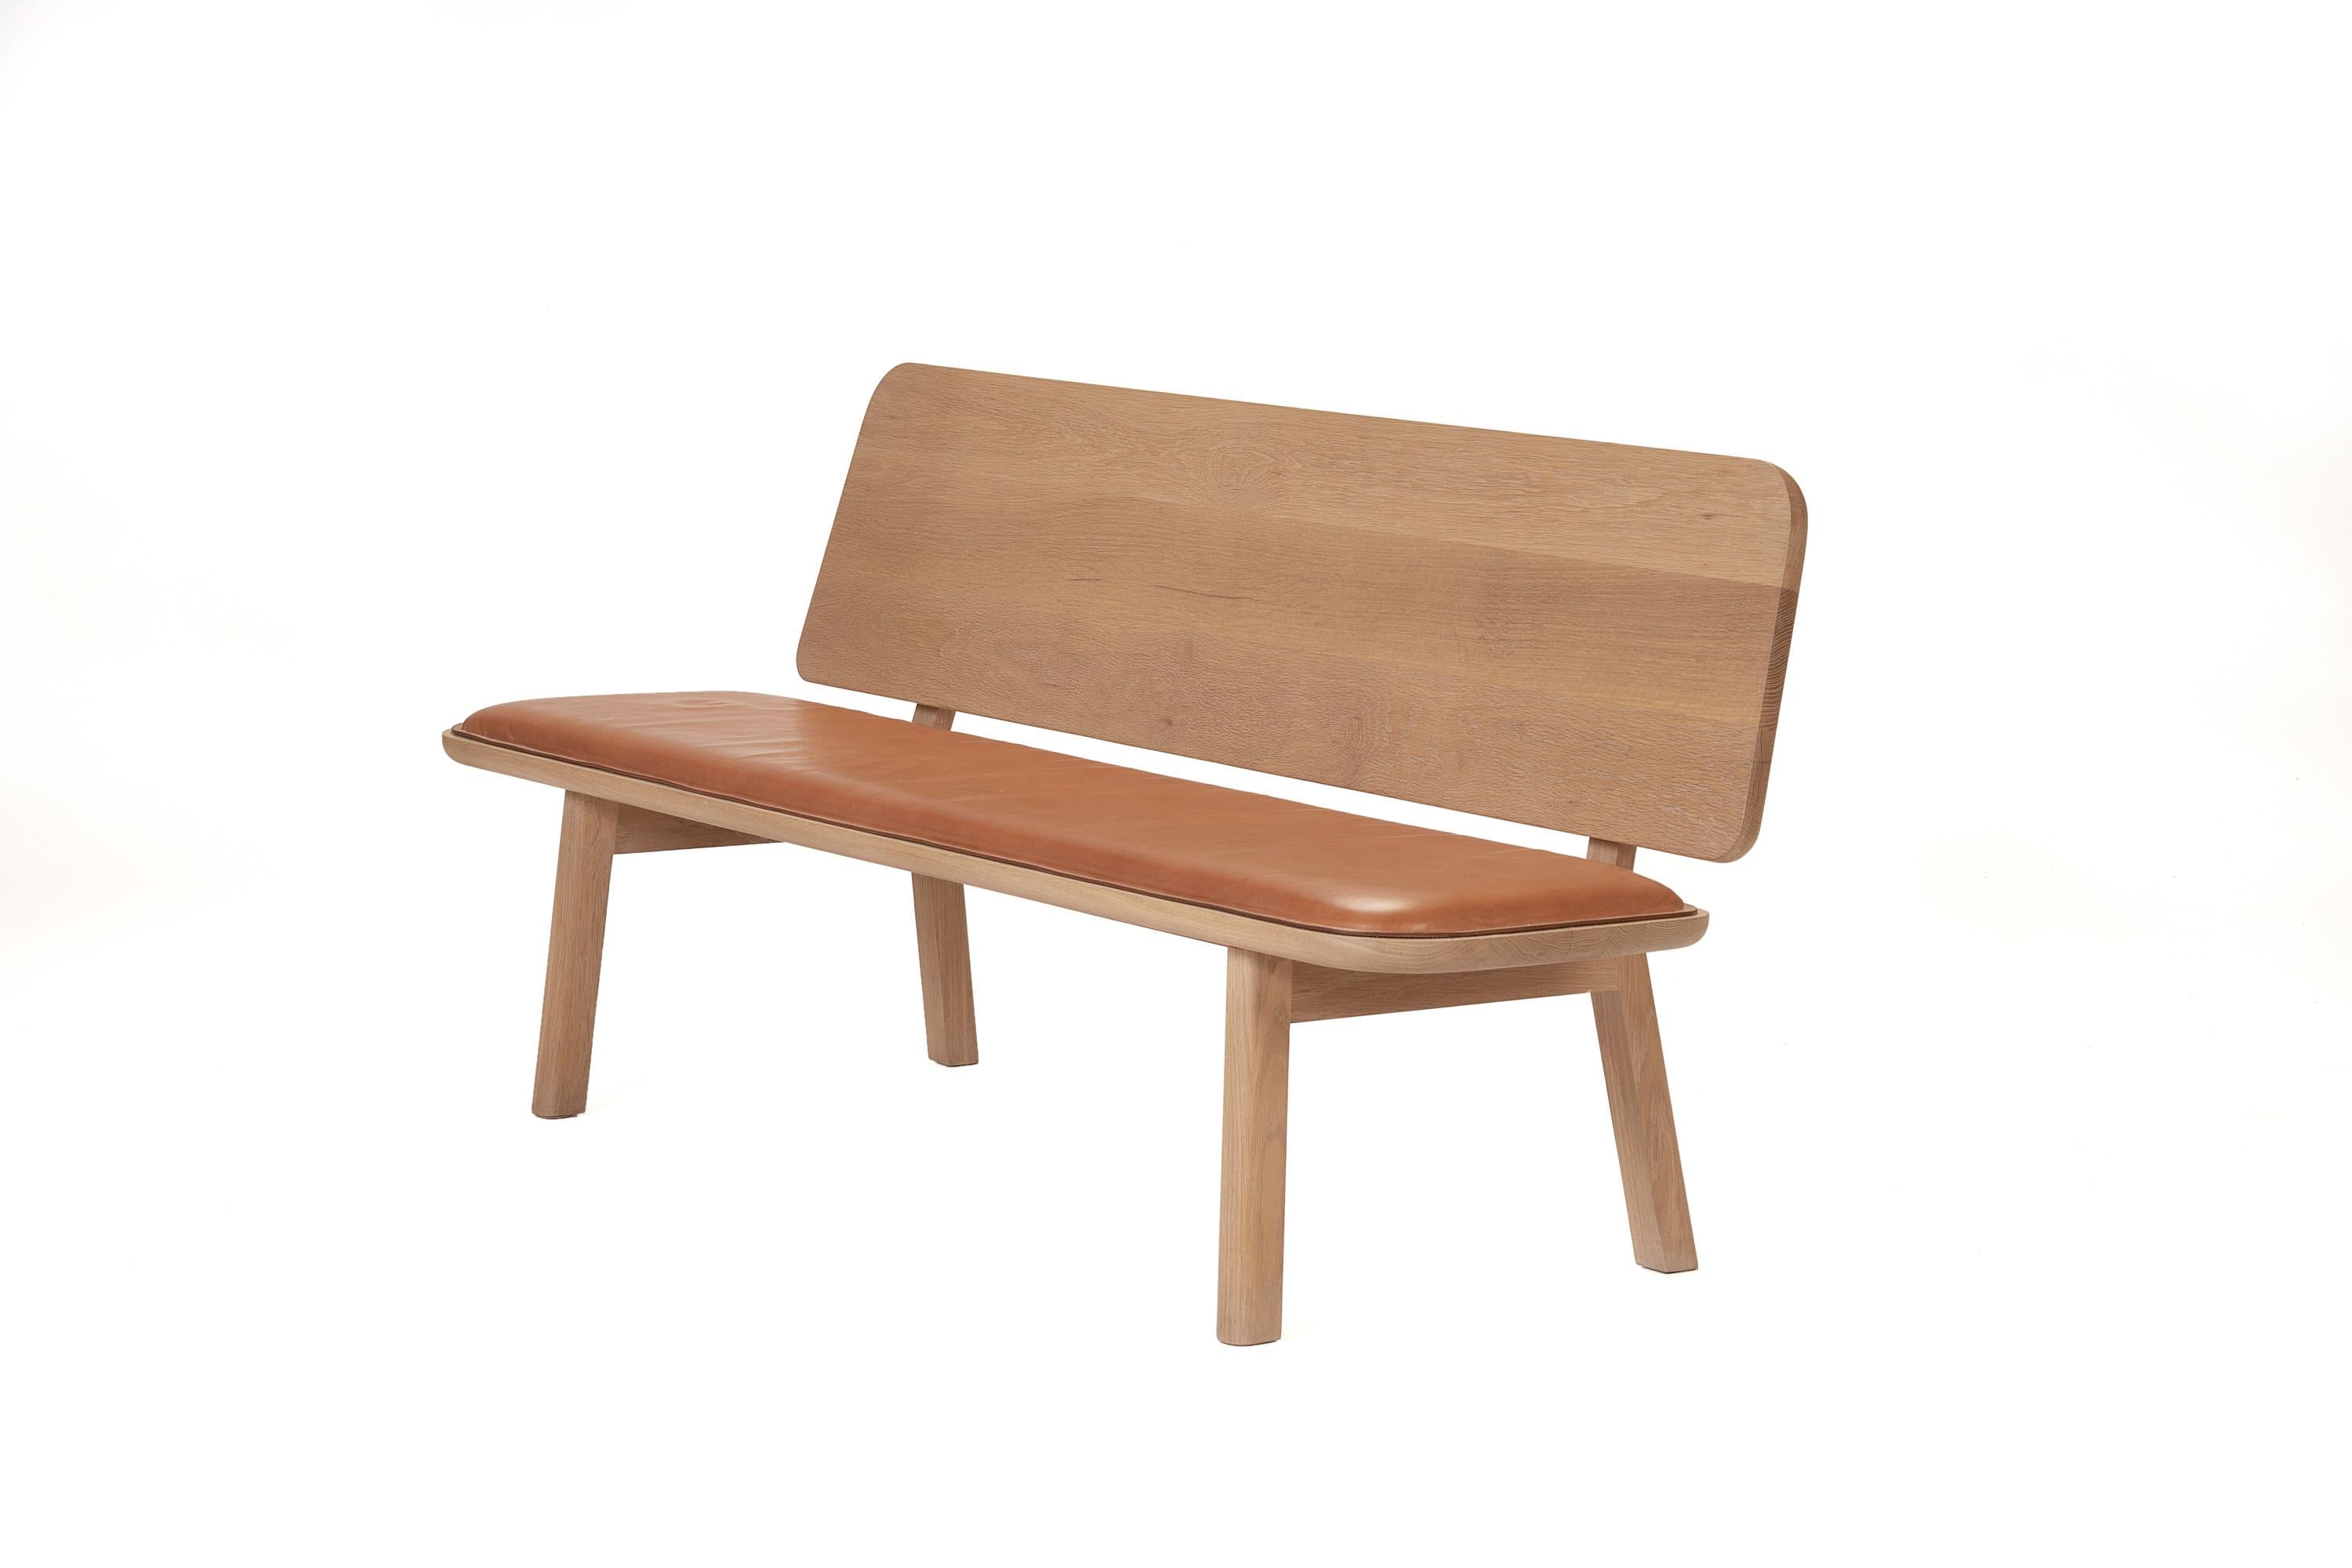 Our Olo bench was designed in 2017 as a crafted approach to public seating. Inspired by the early surf boards of Hawaiian royalty, its dependable structure of solid wood is achievable in lengths up to 12 feet with a variety of upholstery options